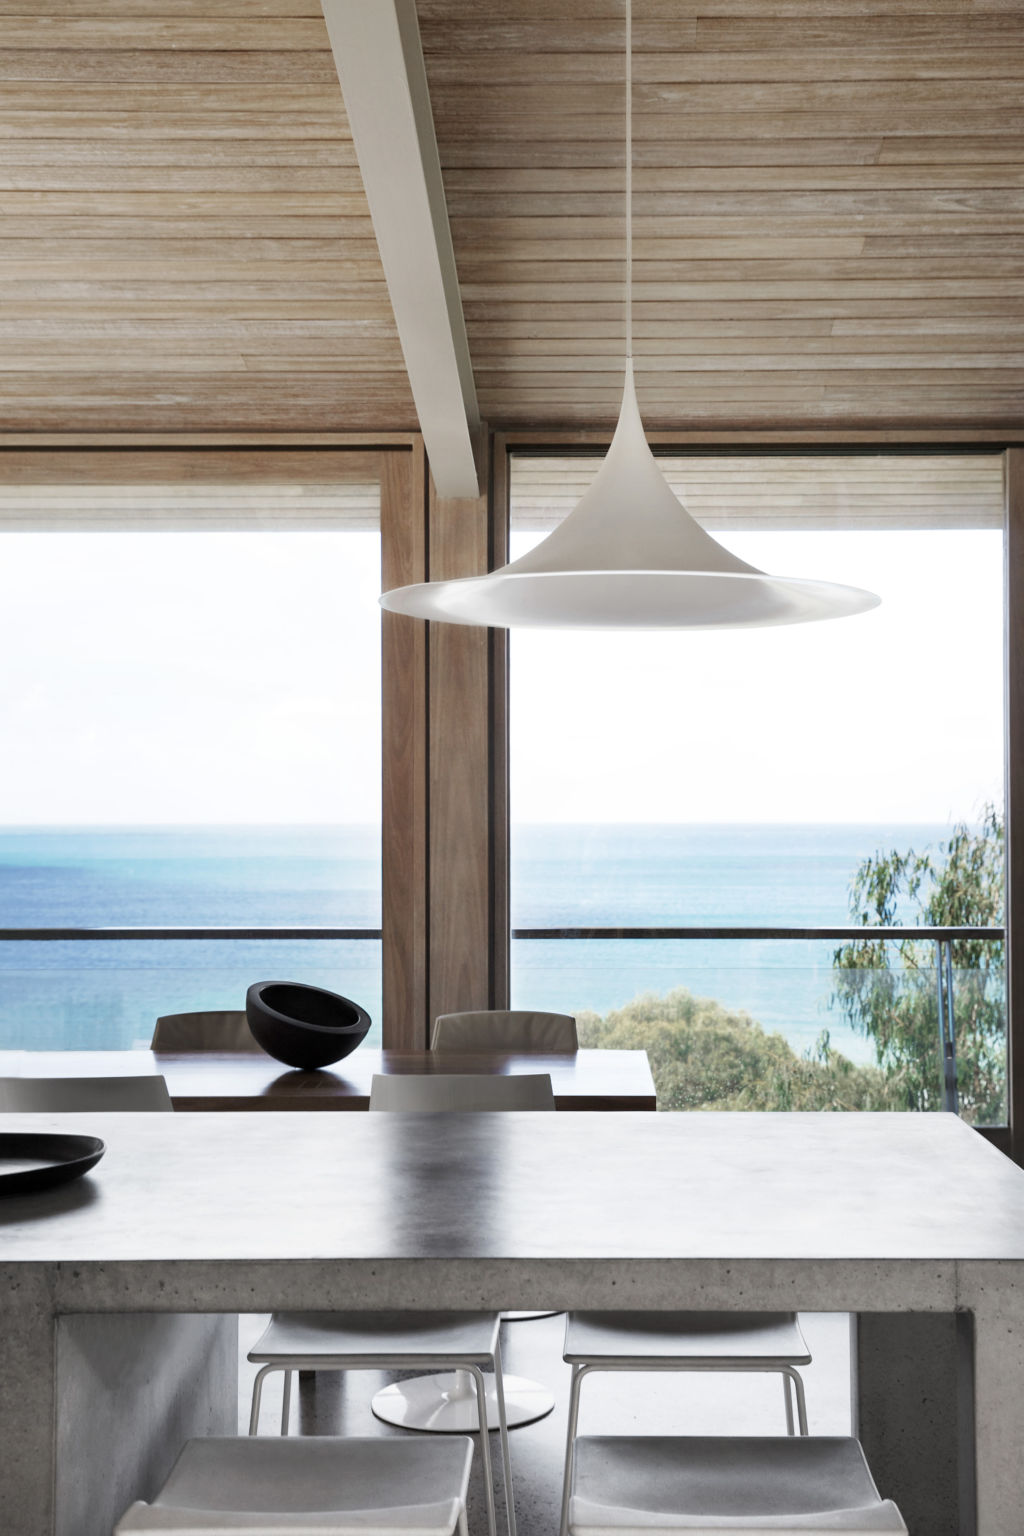 Ocean vistas at Rob Mills' coastal getaway, 2A Tradewinds Avenue in Lorne, which is for sale along with his Armadale home. Photo: Kay & Burton